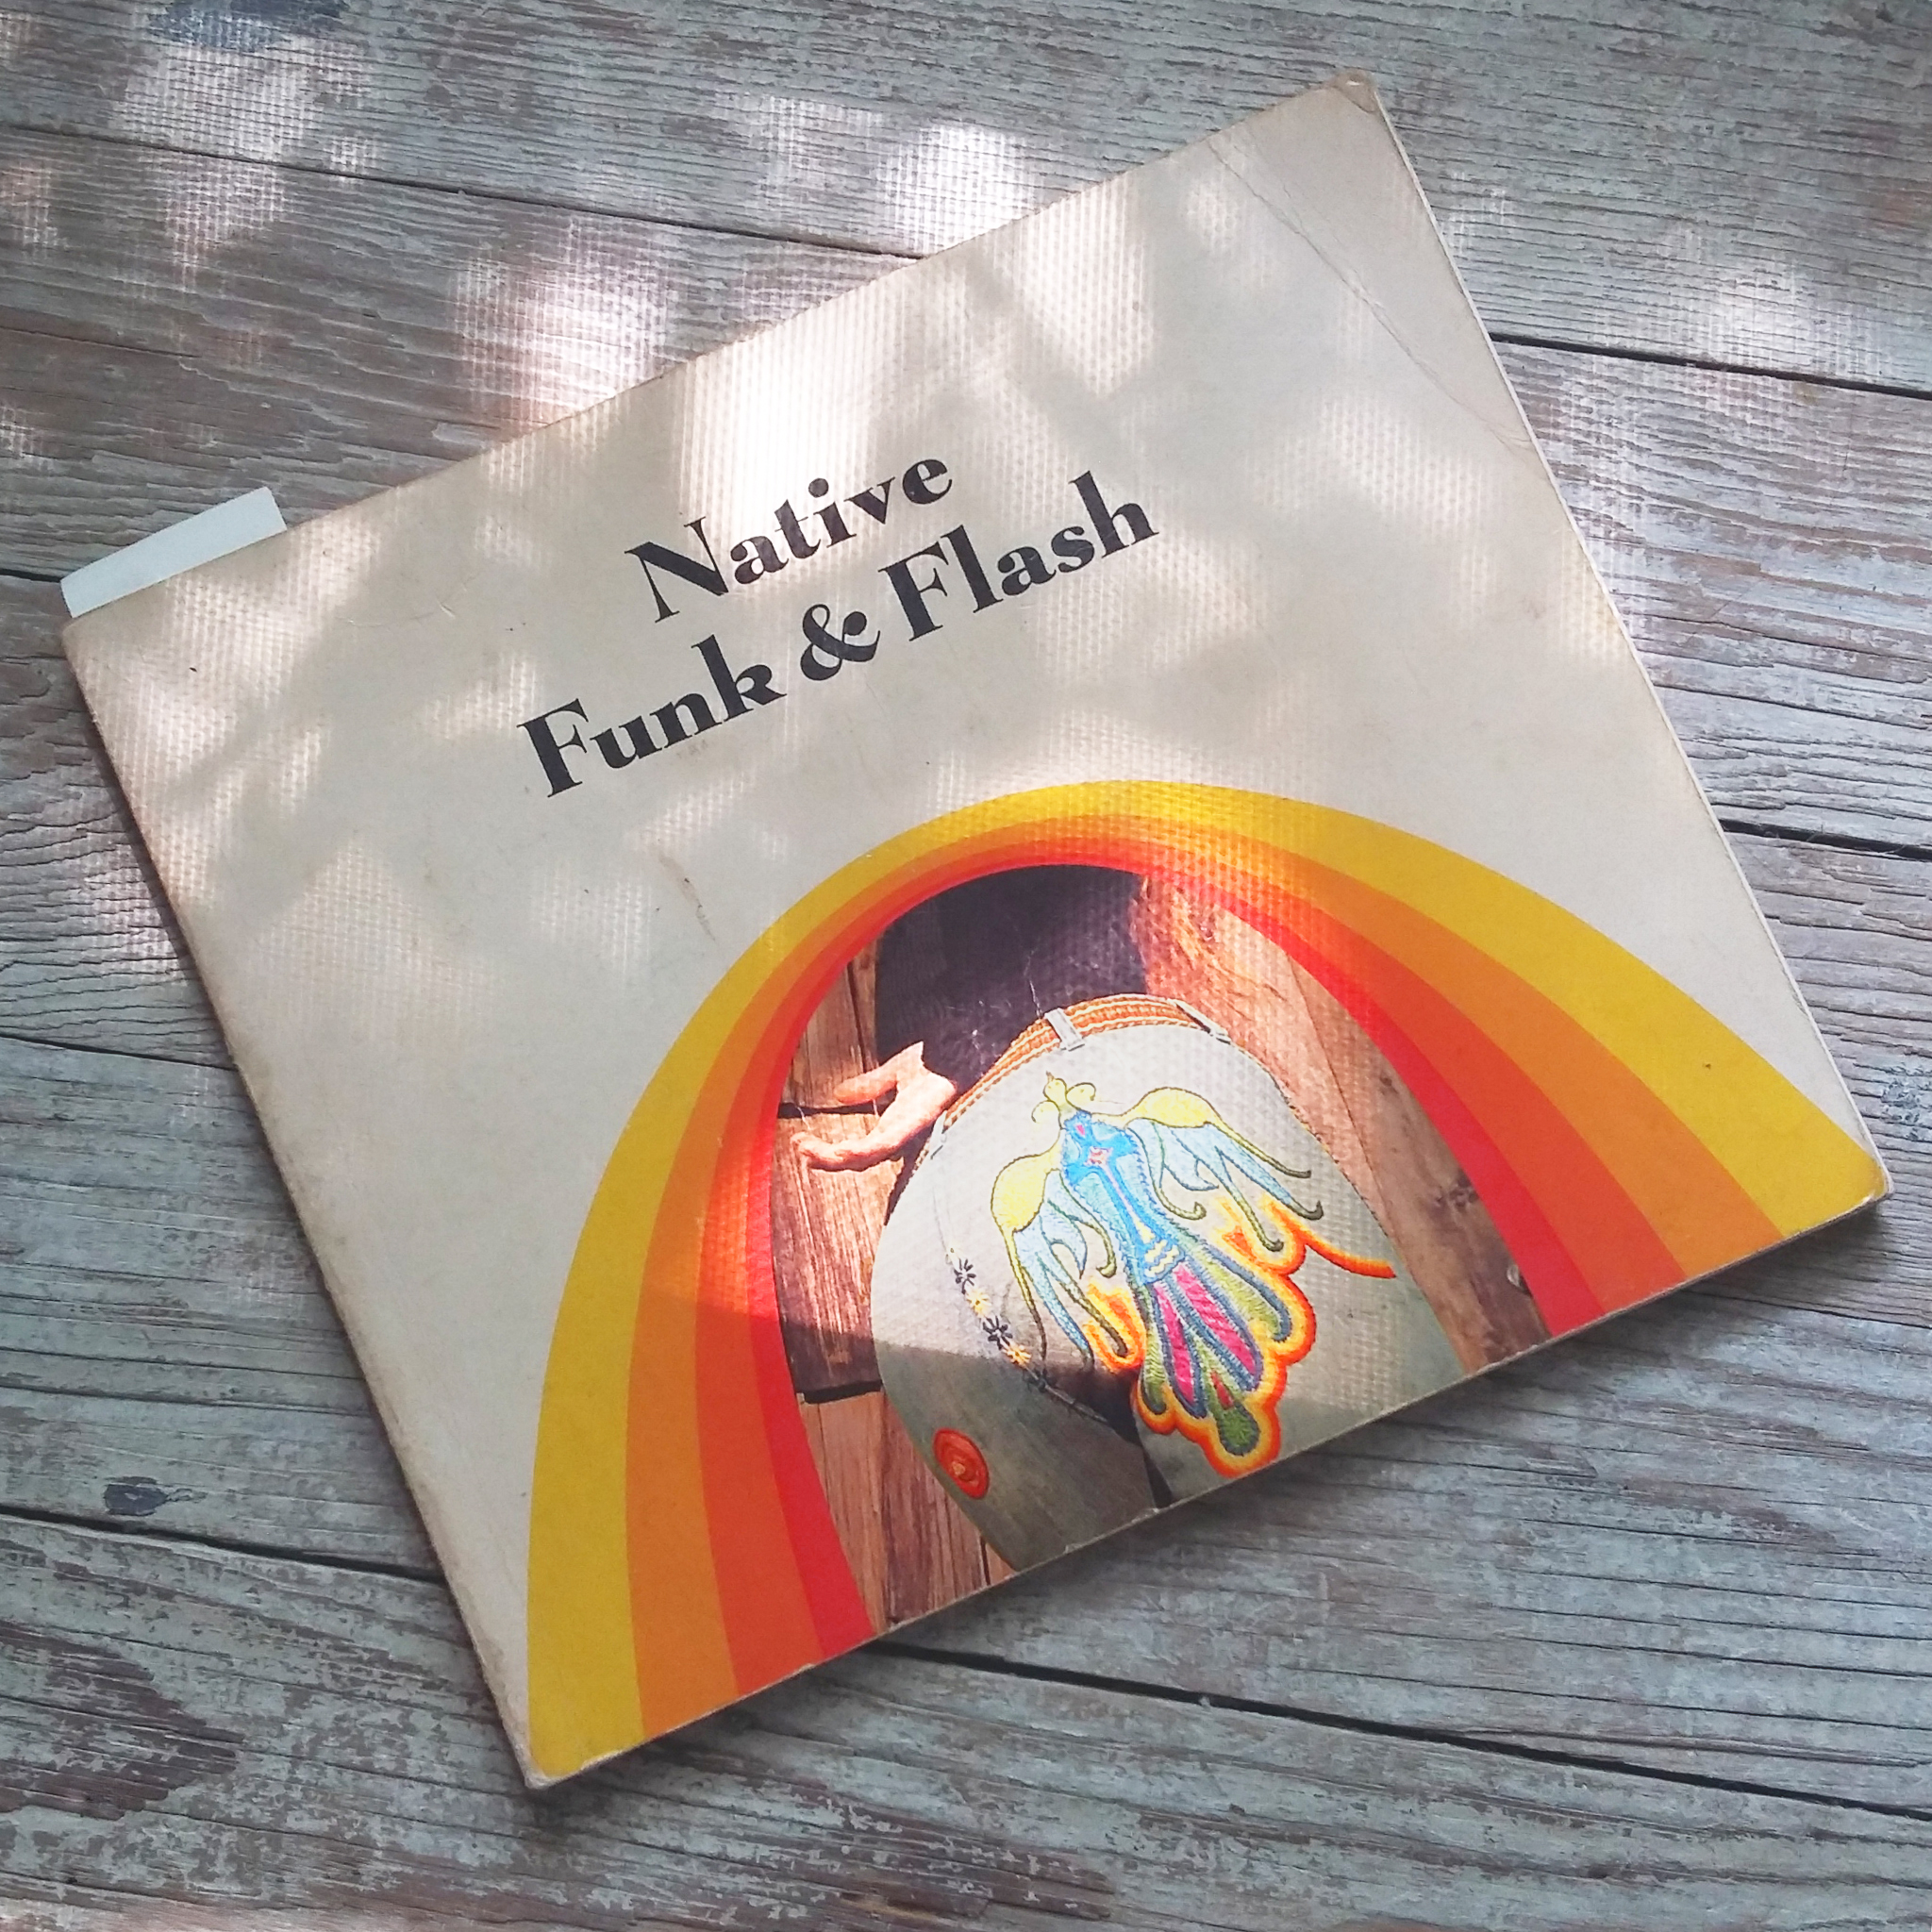 native funk and flash 70s embroidery book